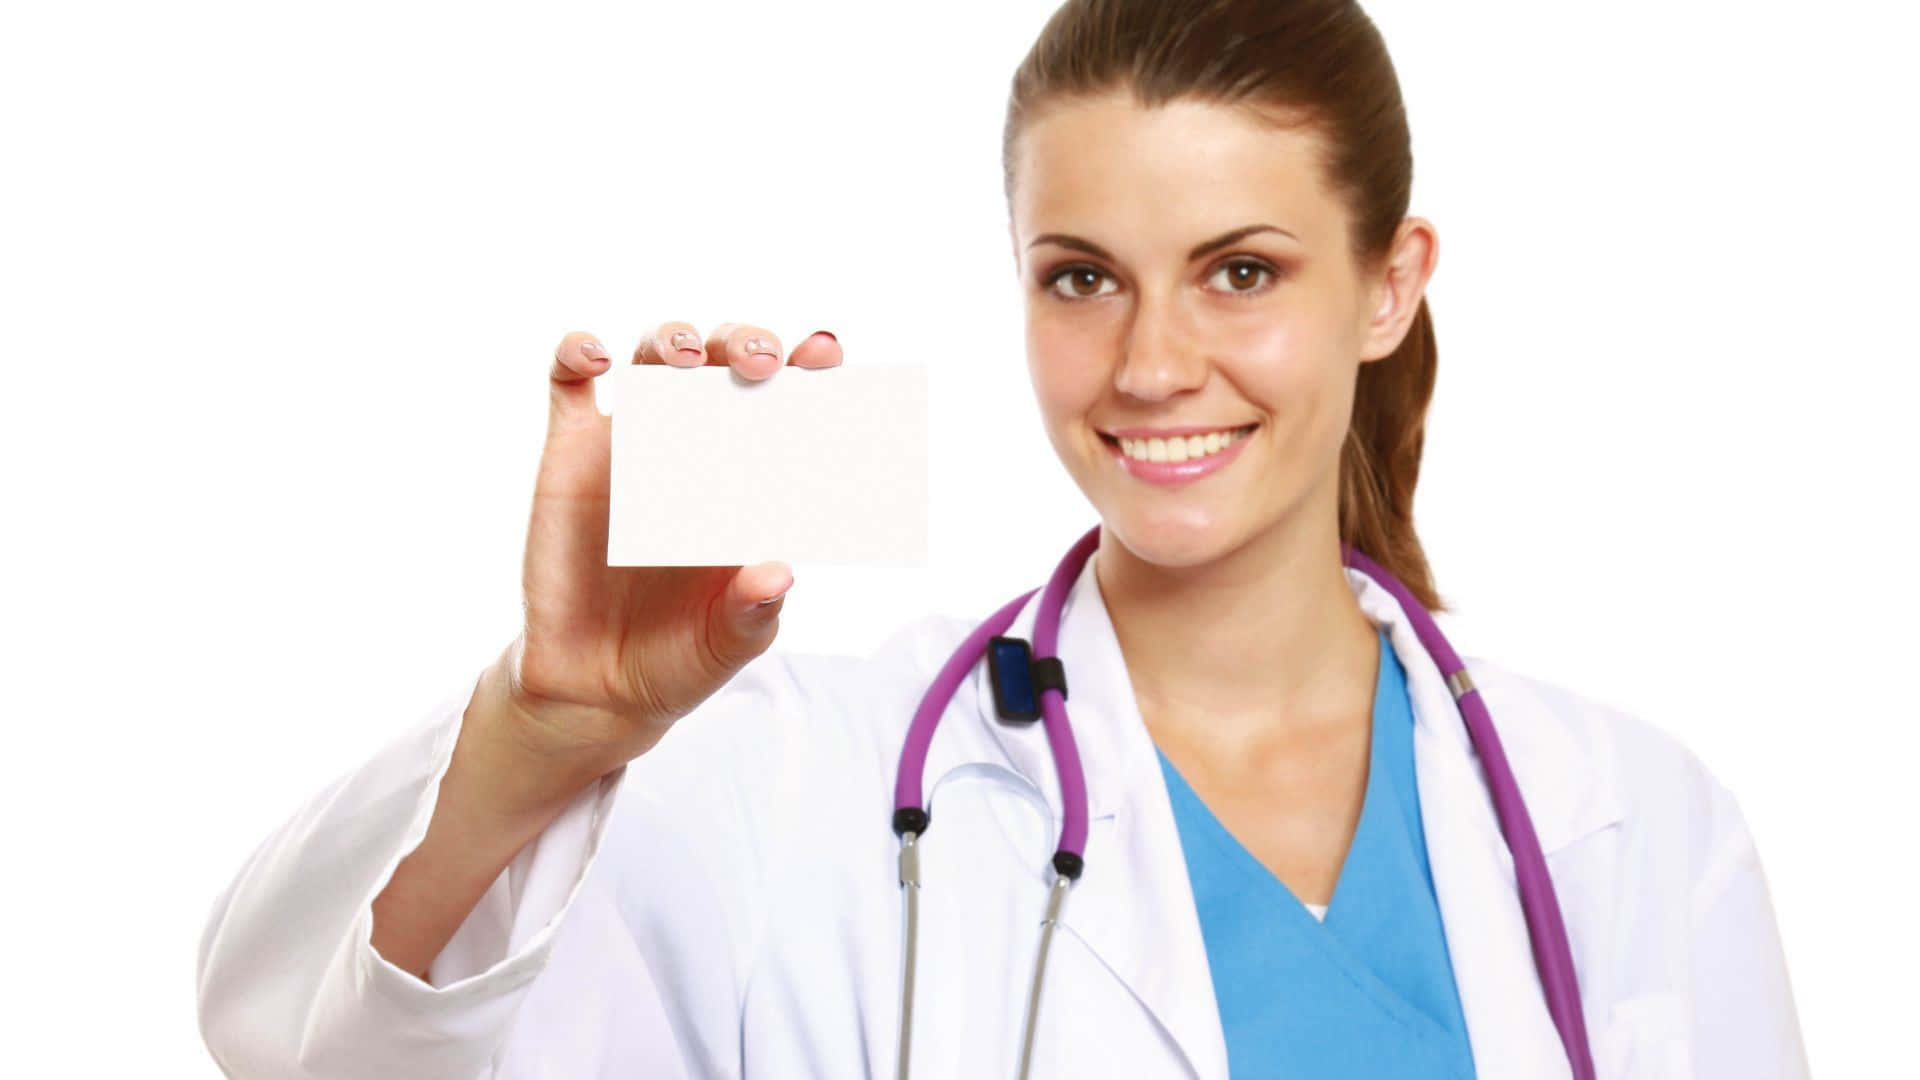 A Female Doctor Holding Up A Blank Card